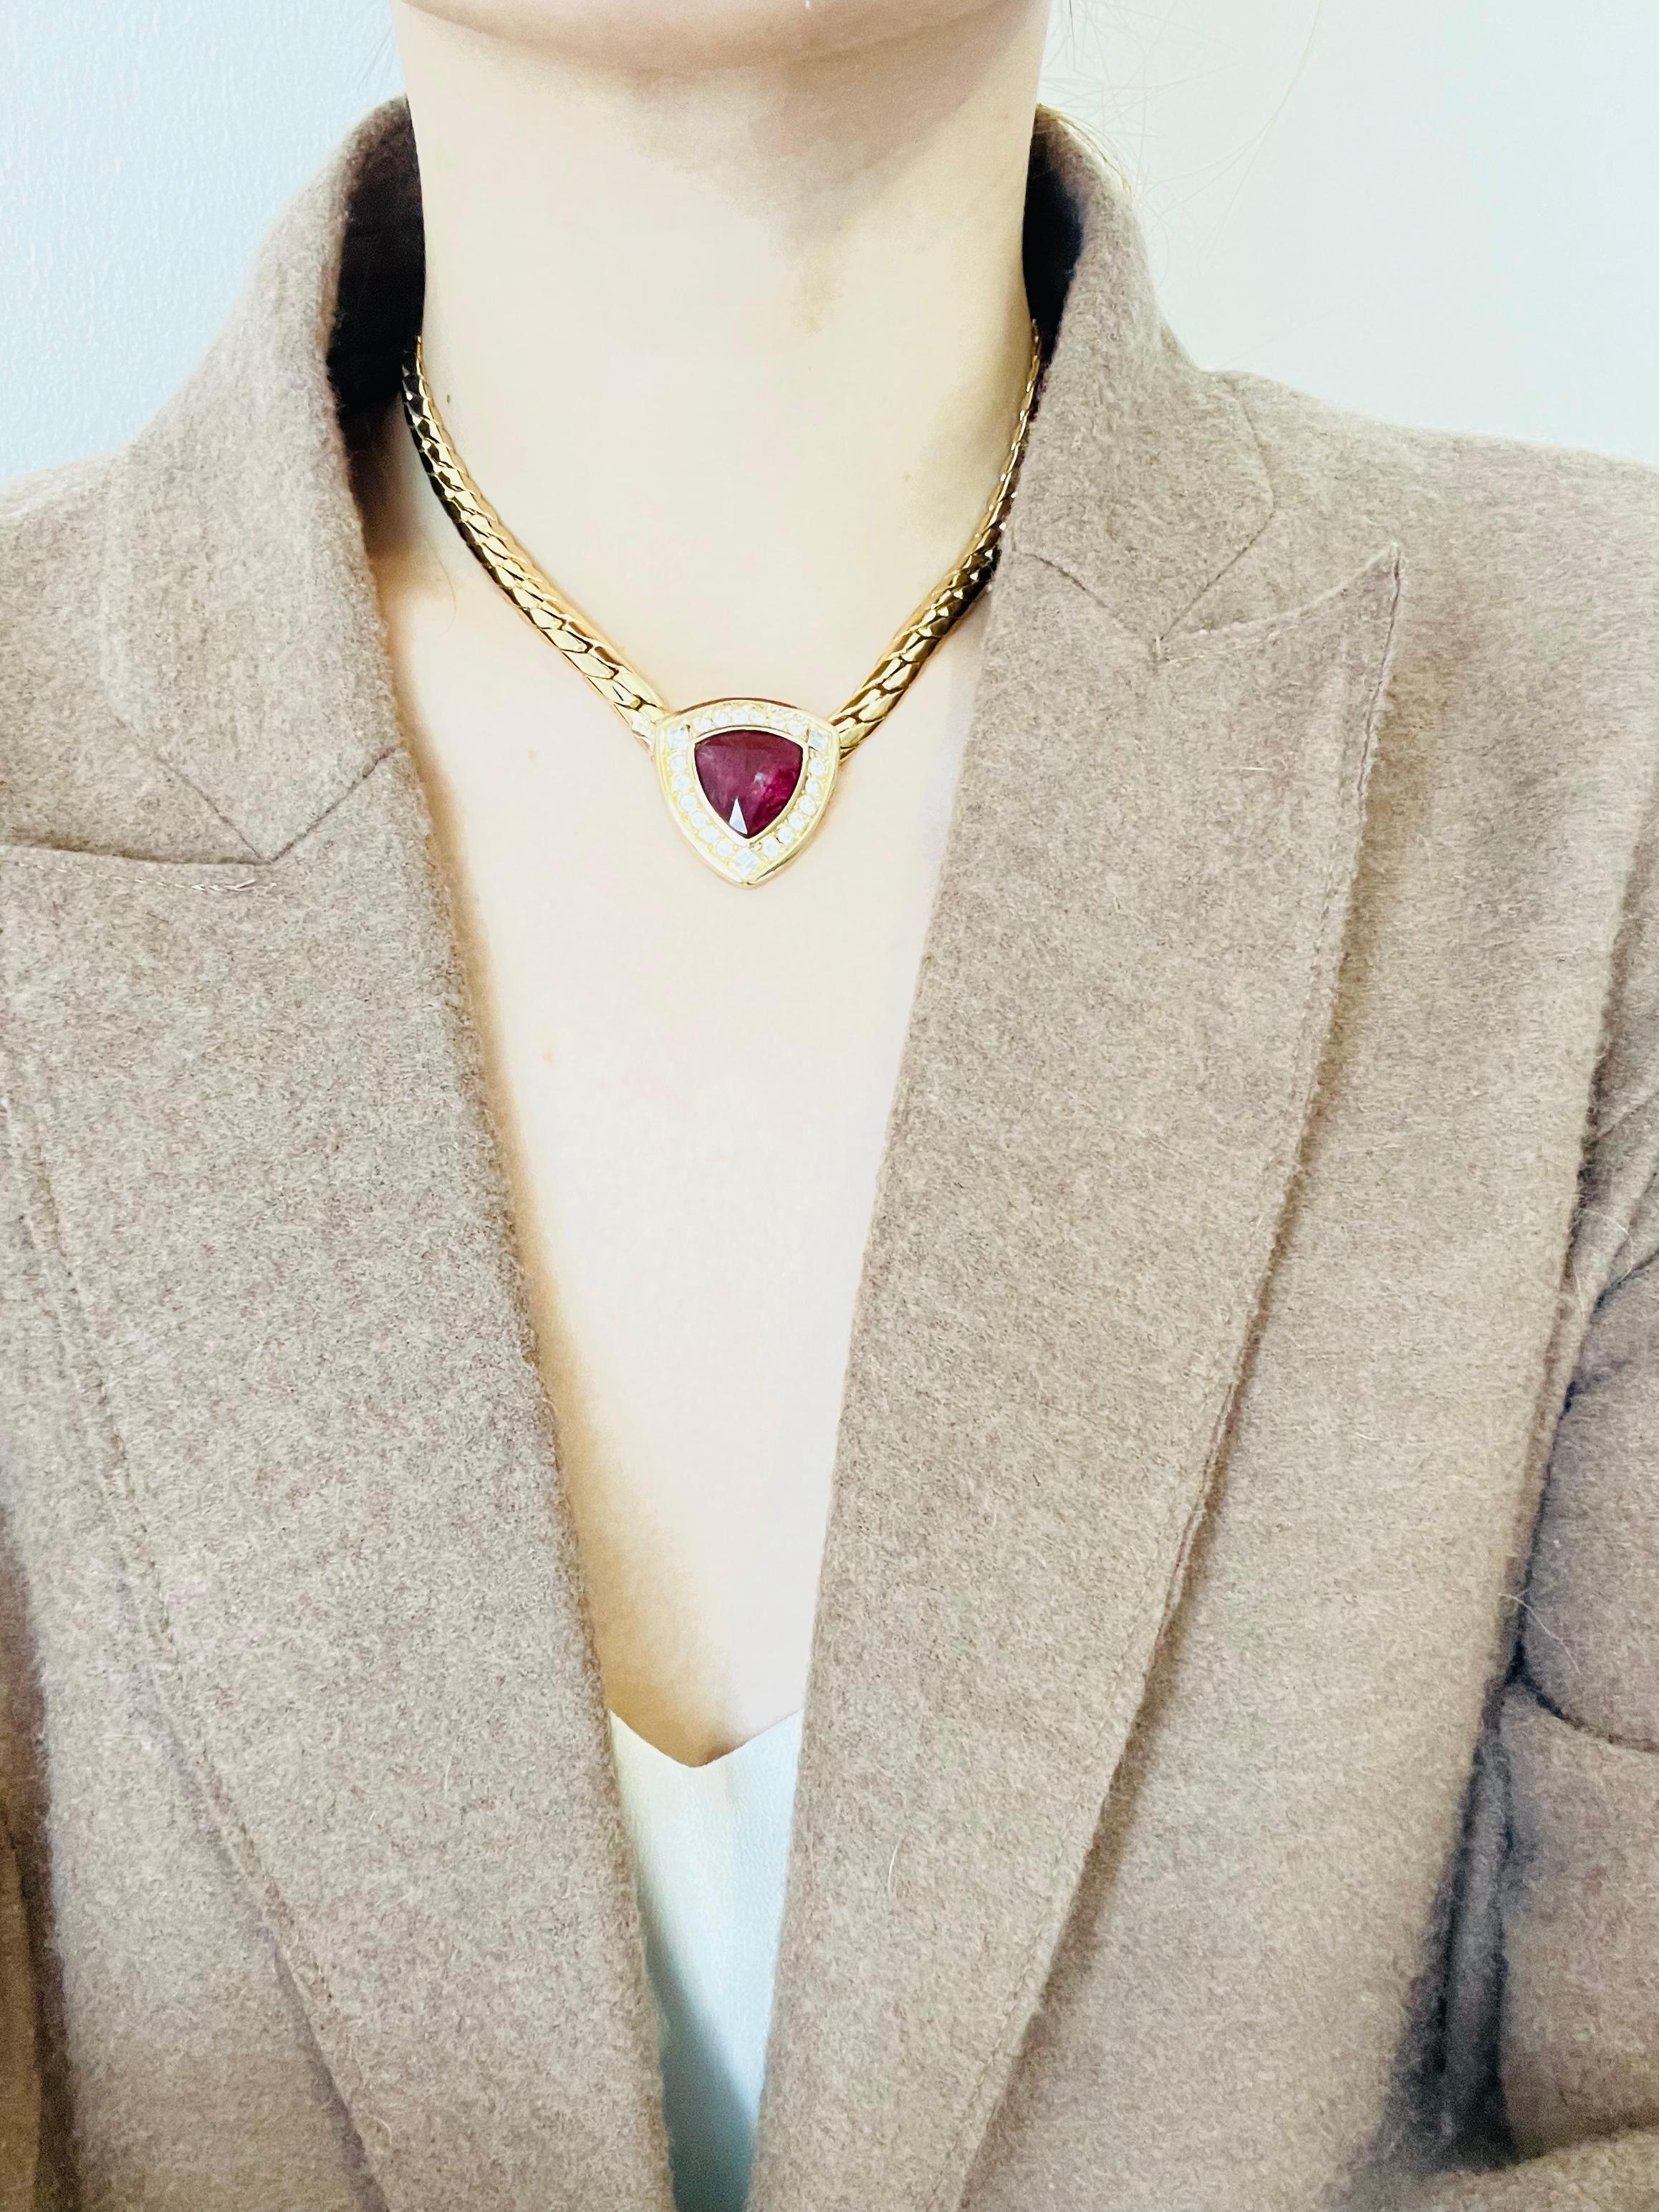 Christian Dior Vintage 1980s Ruby Red Diamond Triangle Crystals Gold Necklace In Excellent Condition For Sale In Wokingham, England